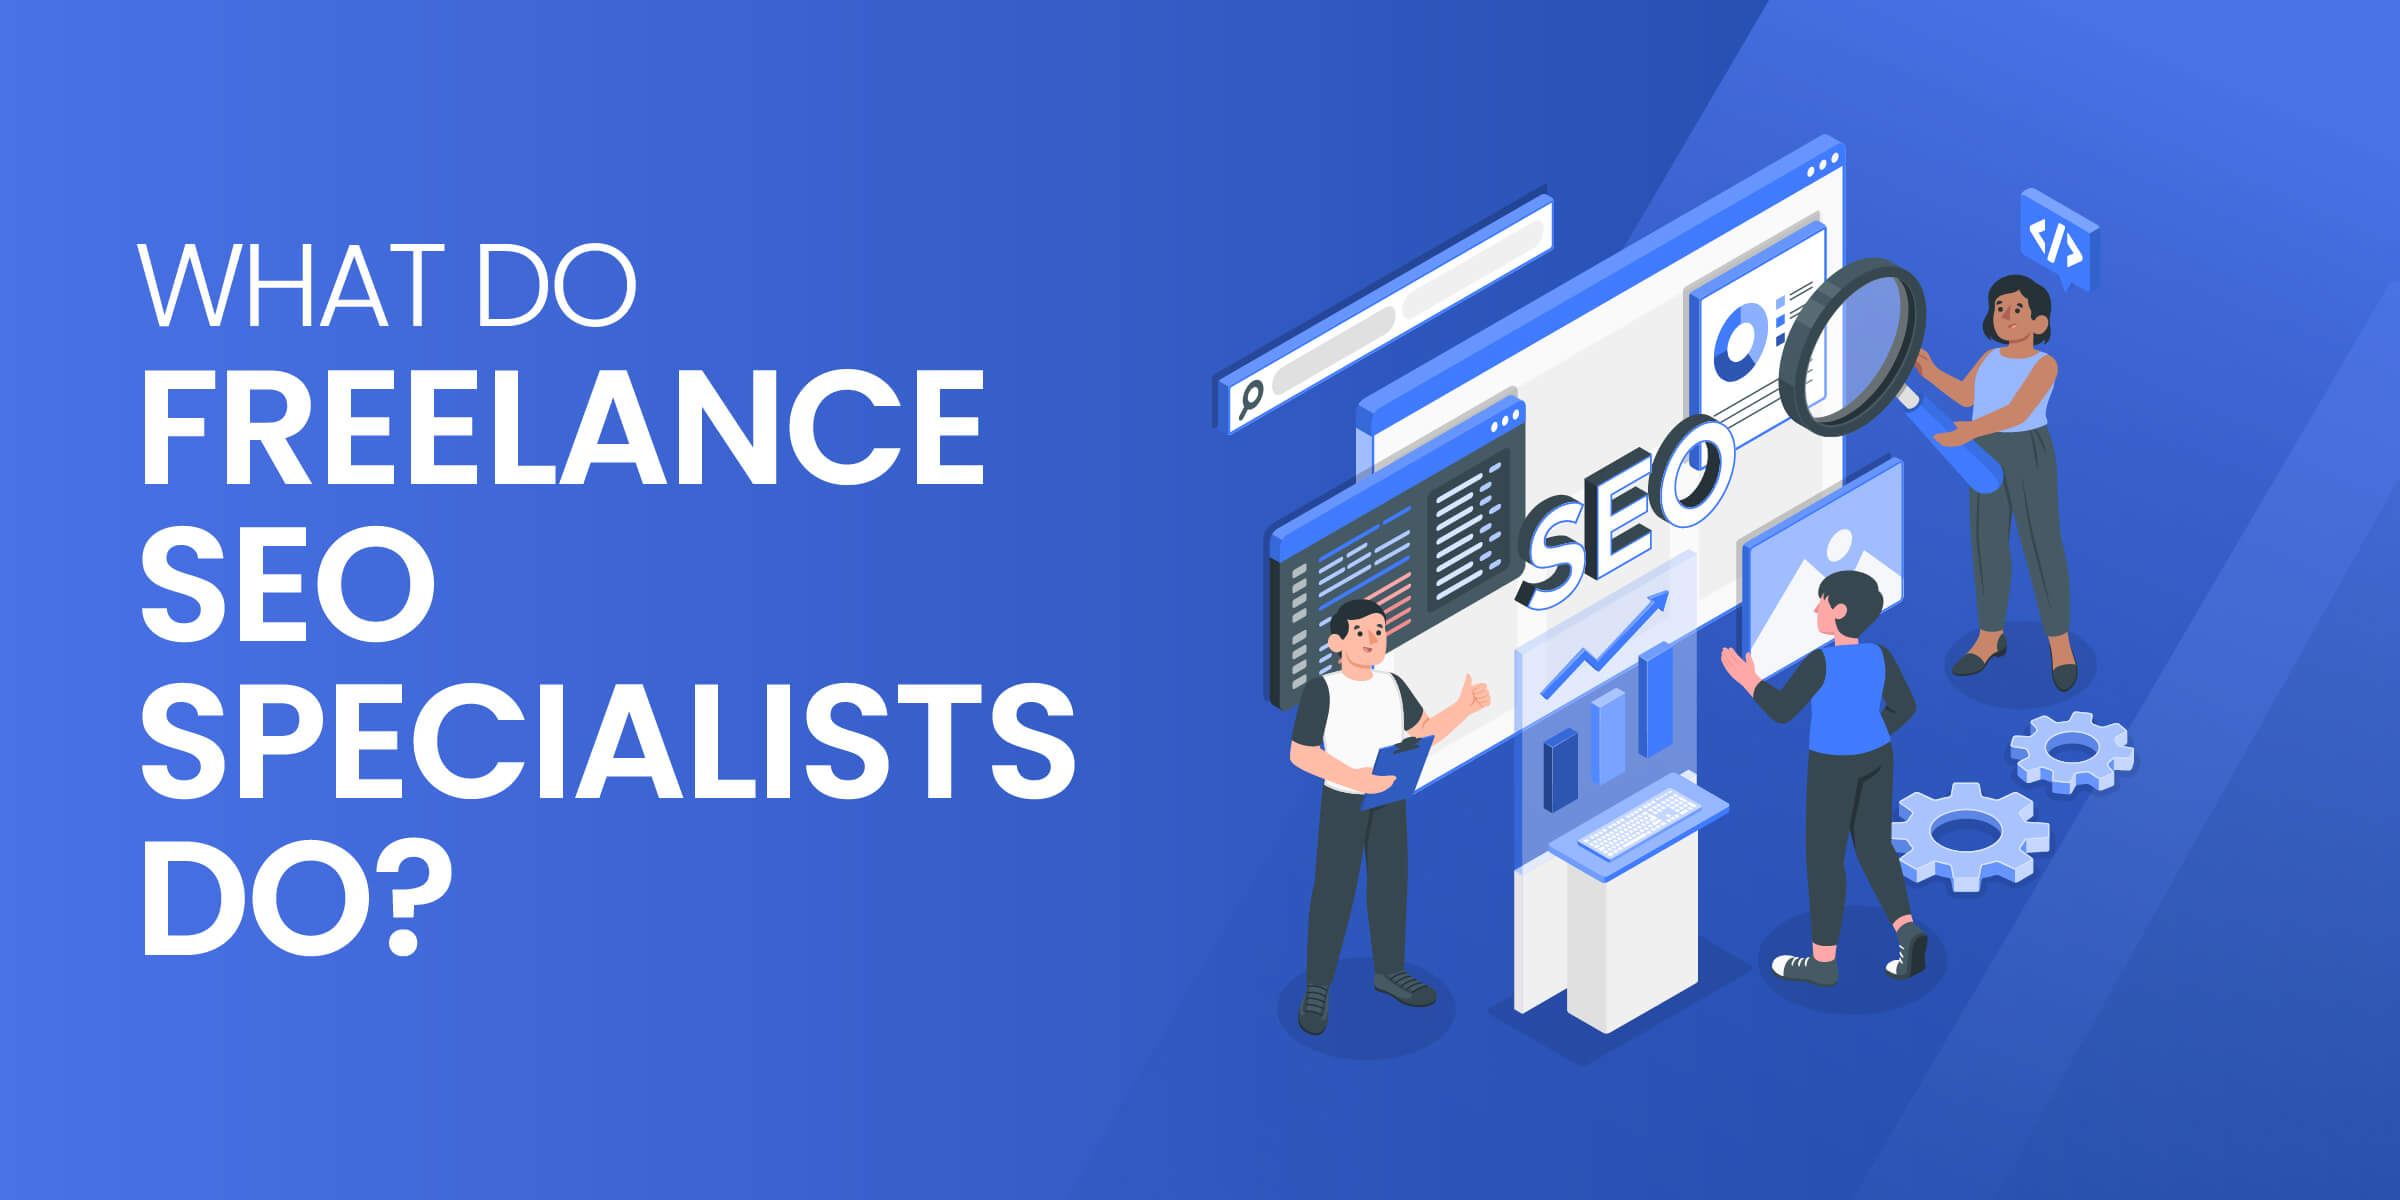 What Do Freelance SEO Specialists Do